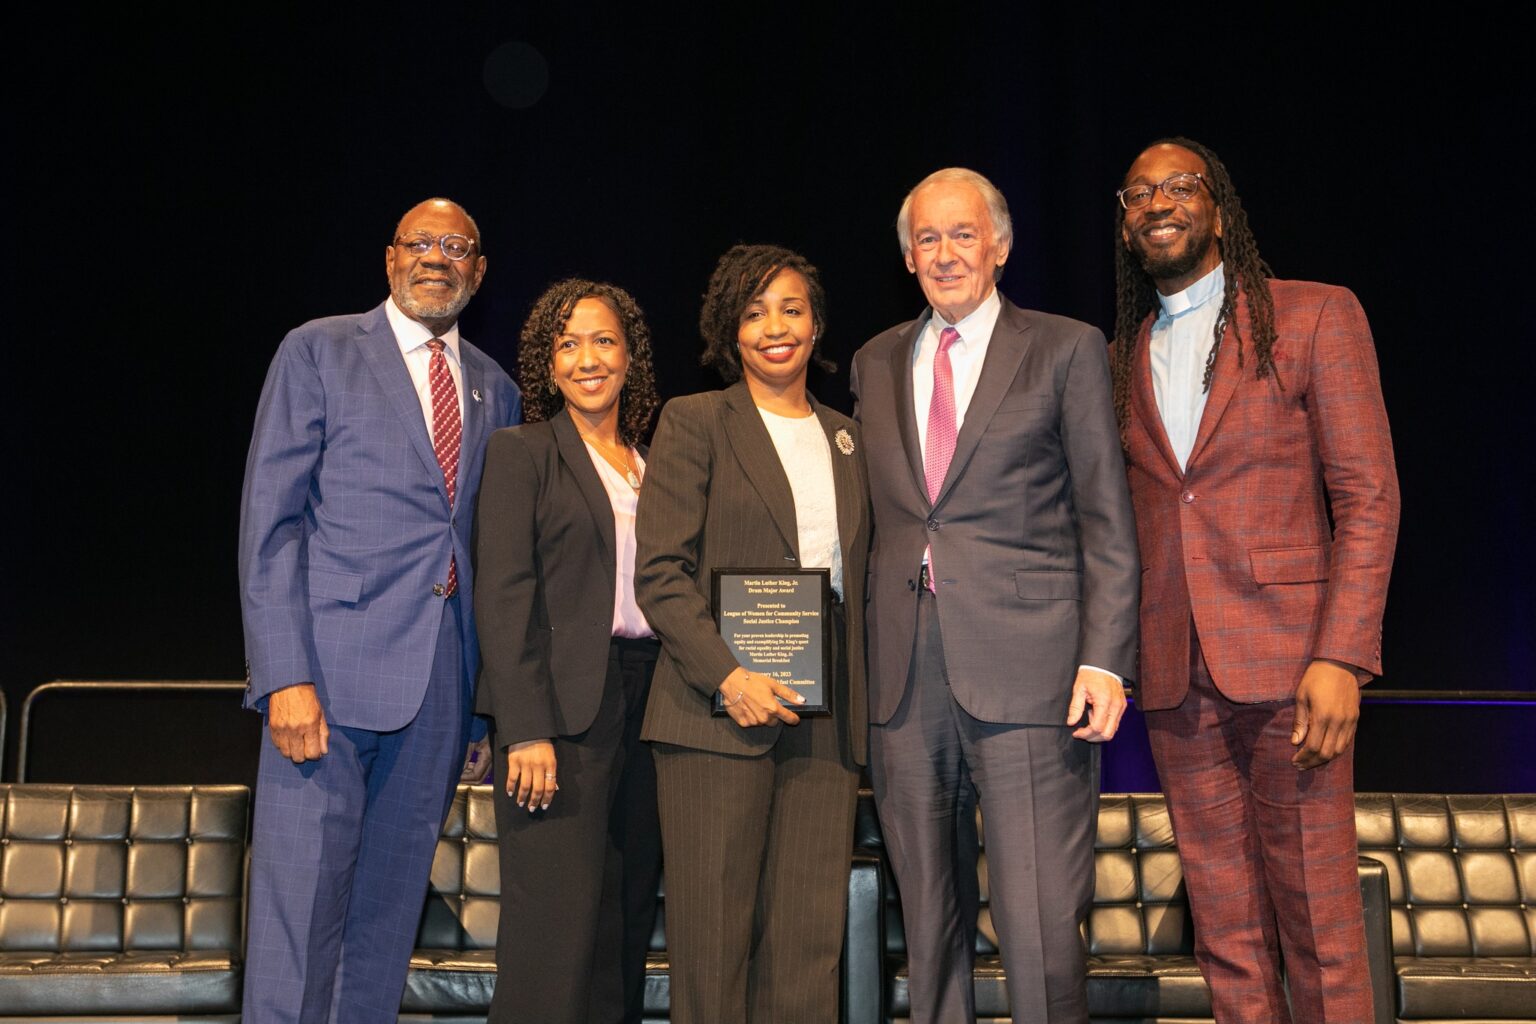 Kalimah Redd-Knight, representing League of Women in Community Service, accepts, the 2023 Drum Major Award with Sen. Ed Markey and MLK Memorial Breakfast Committee Co-Chairs James Dilday, Esq., and Rev. Dr. Jay Williams.